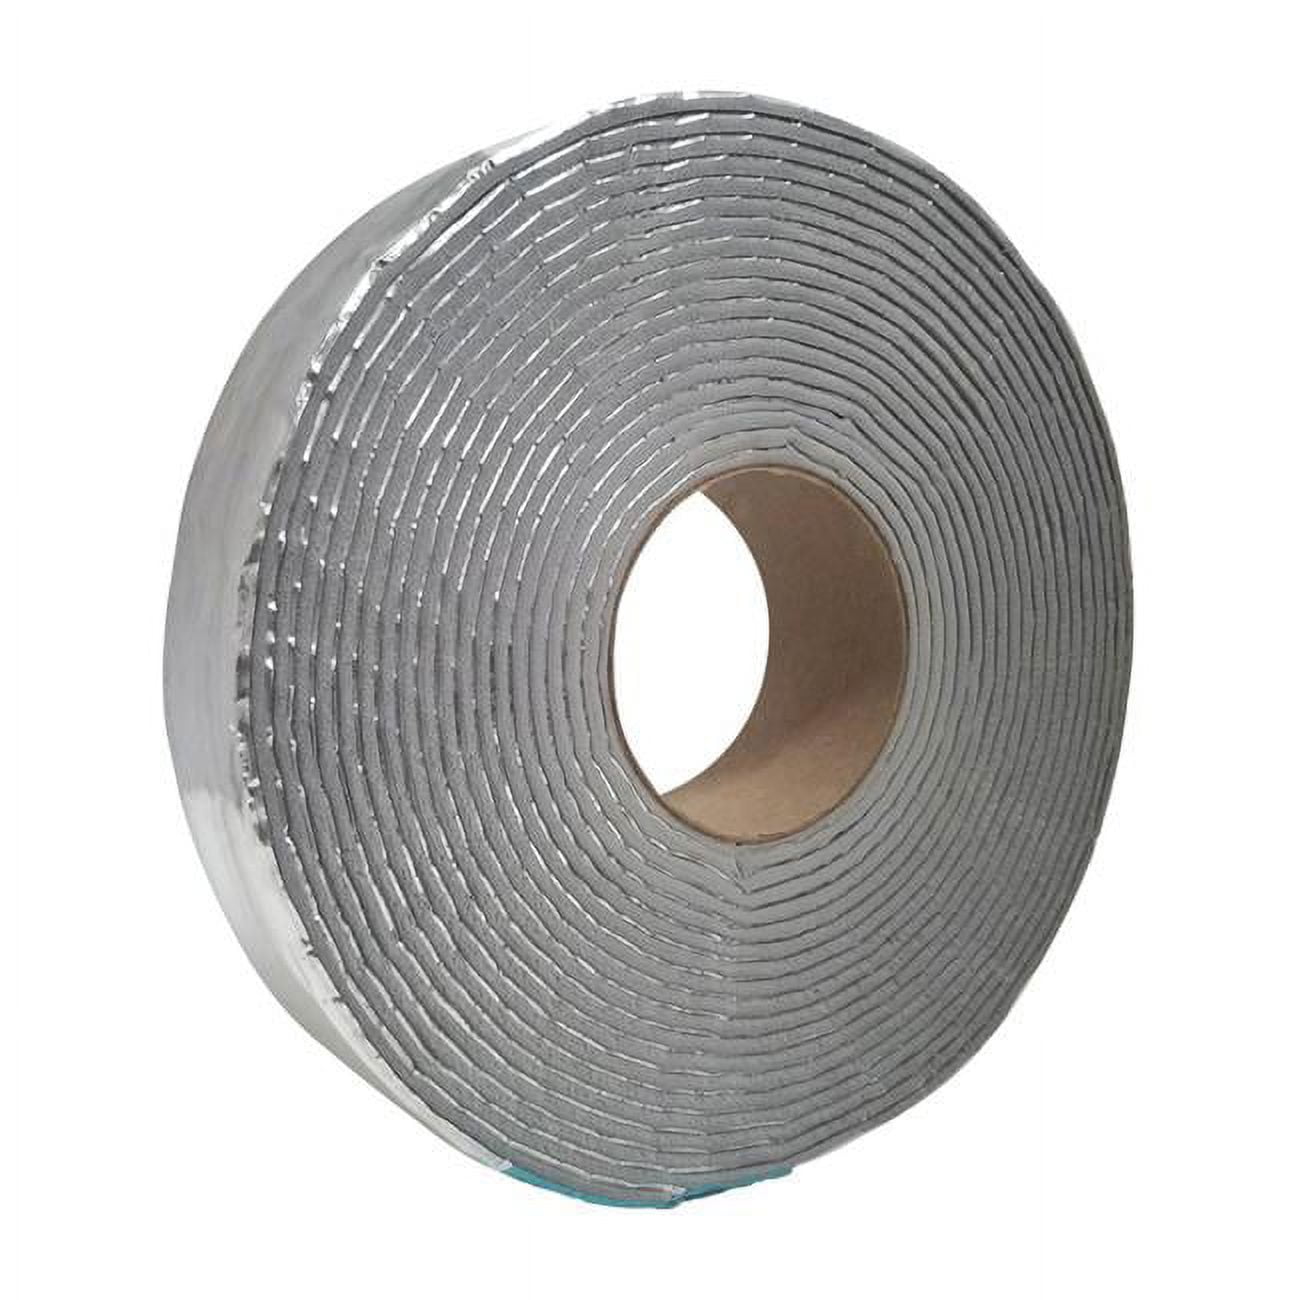 5007266 Pipe Insulation Wrap, 2 In. Roll - Case Of 12